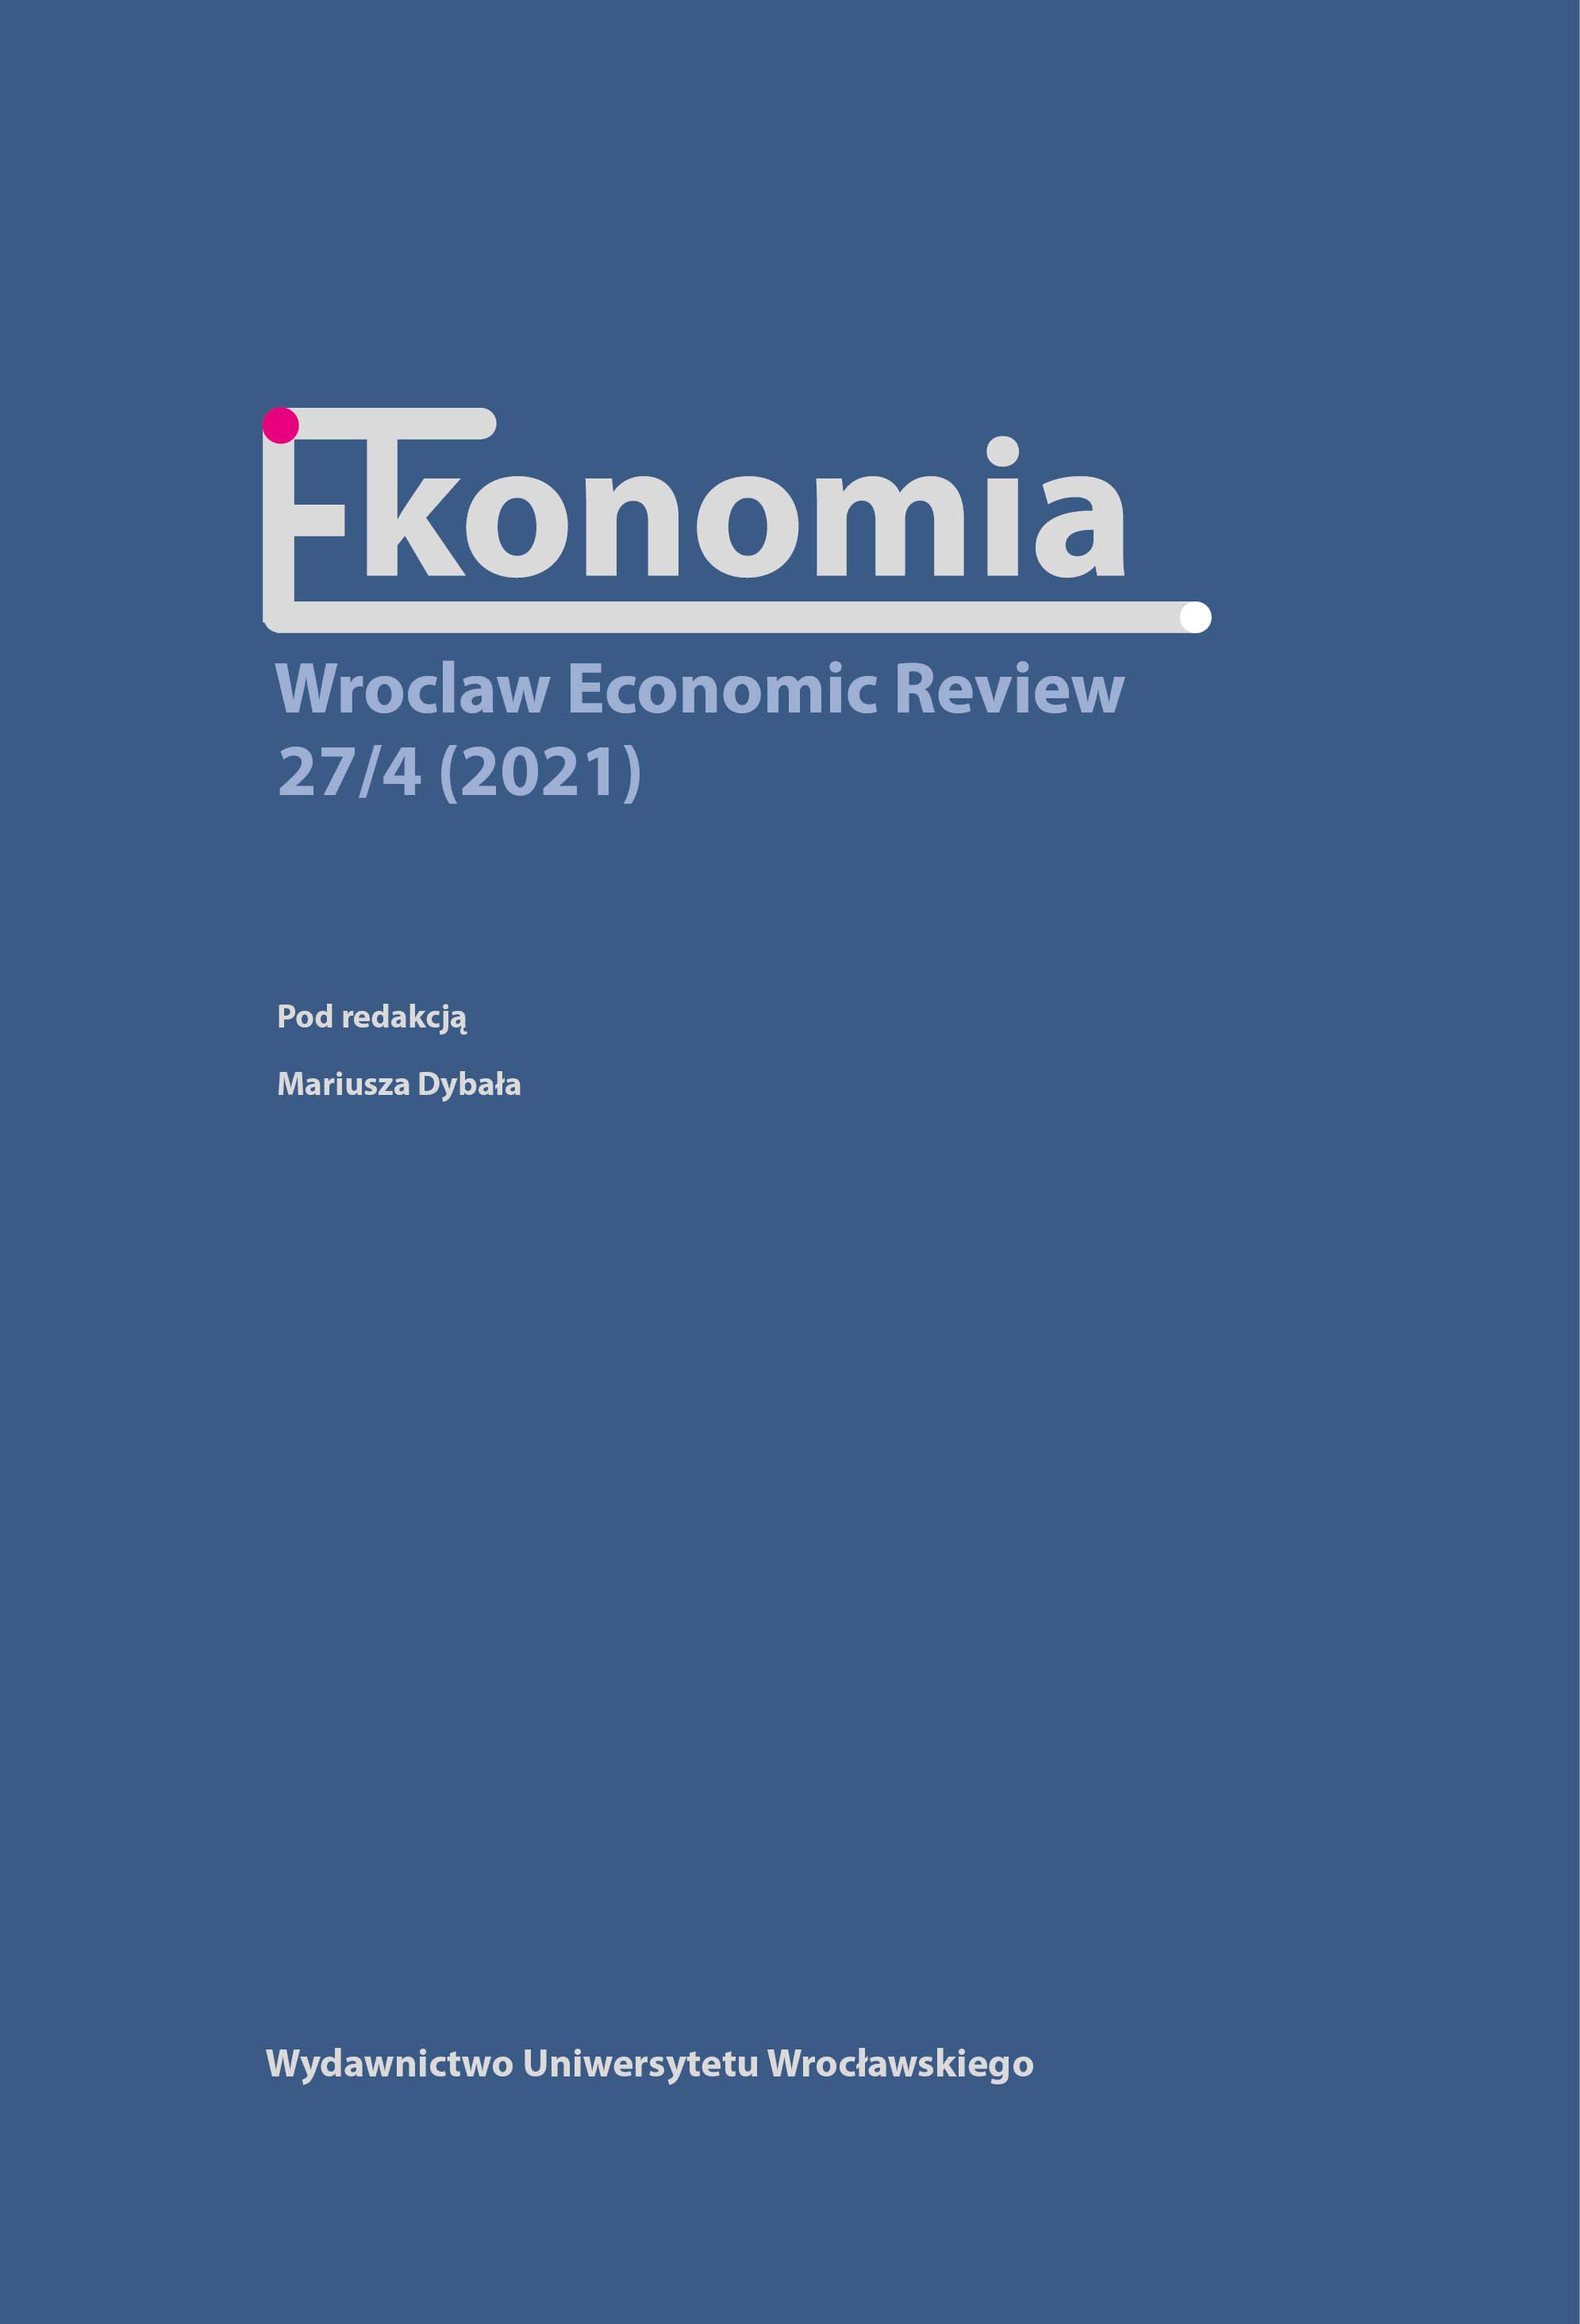 Patent law and innovations of the Polish economy: Analysis of the current situation and recommendations for the future Cover Image